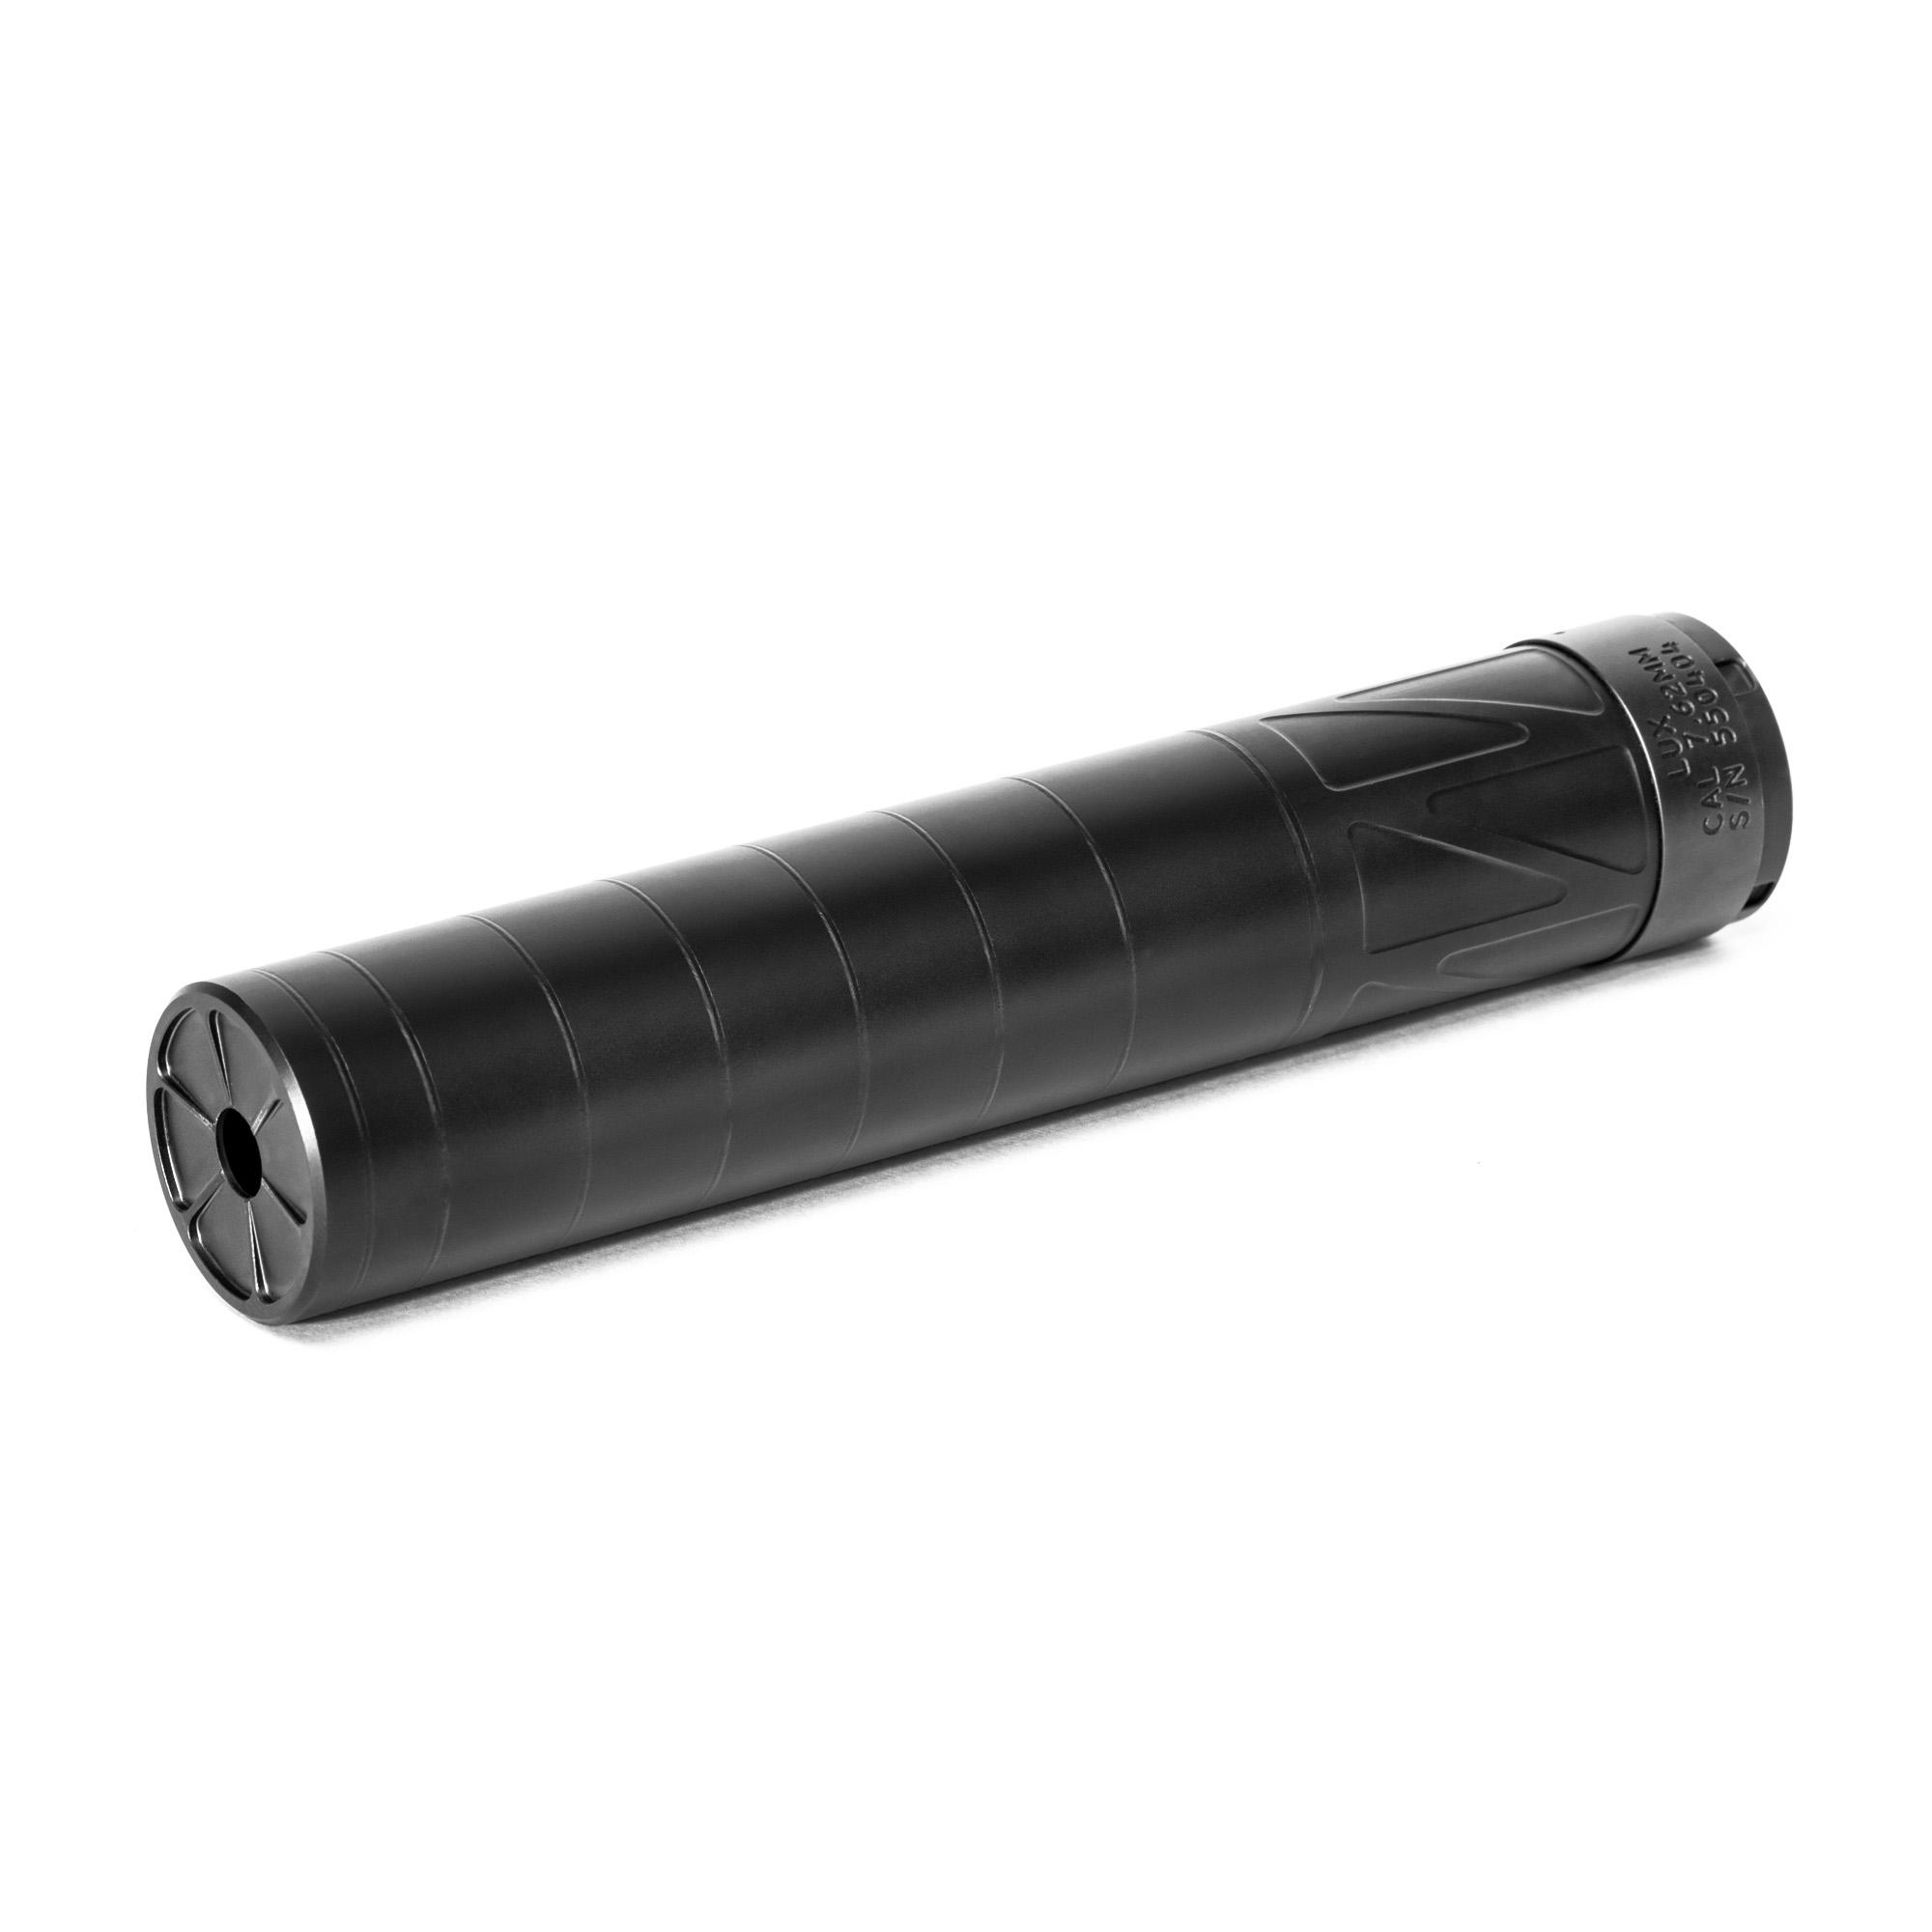 Rifle ENERGETIC LUX SILENCER 7.62 DARK GRY image 2